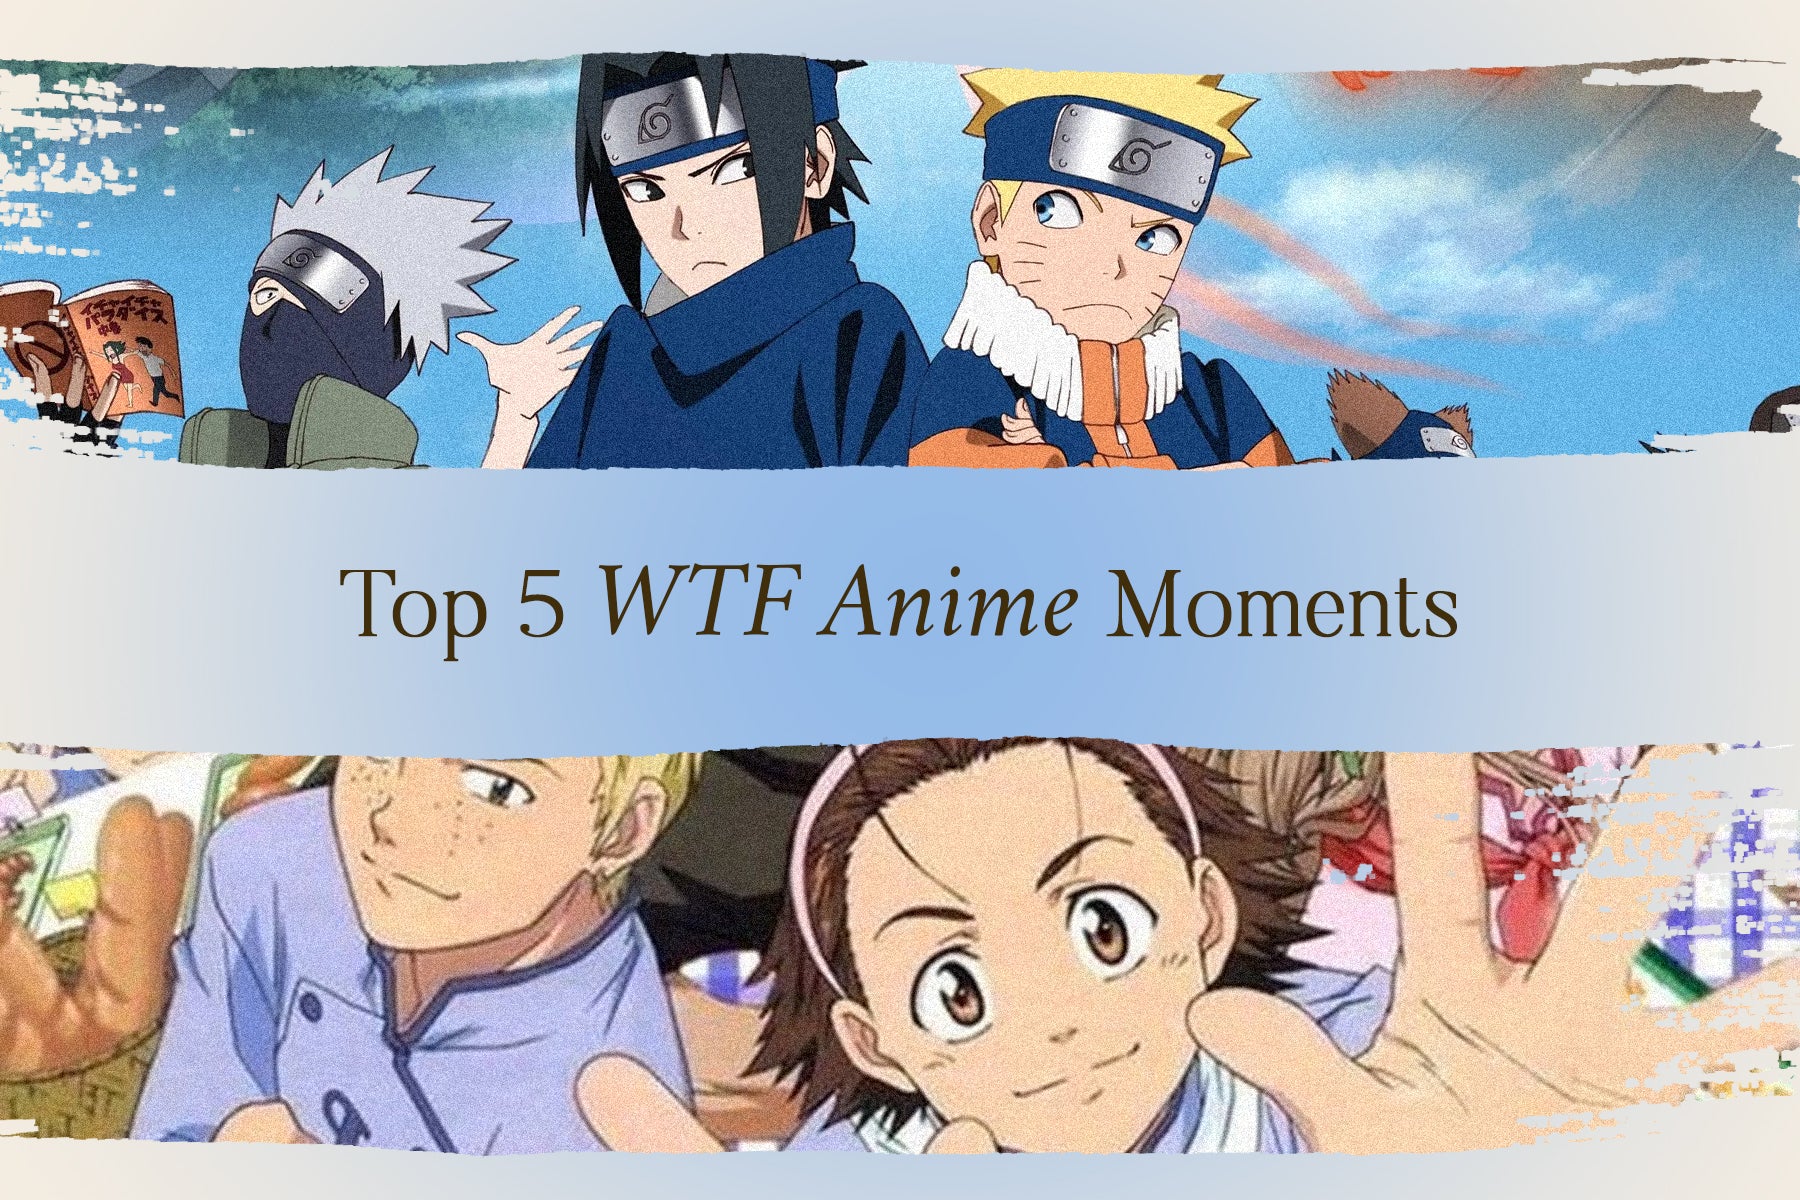 Top 5 WTF Anime Moments